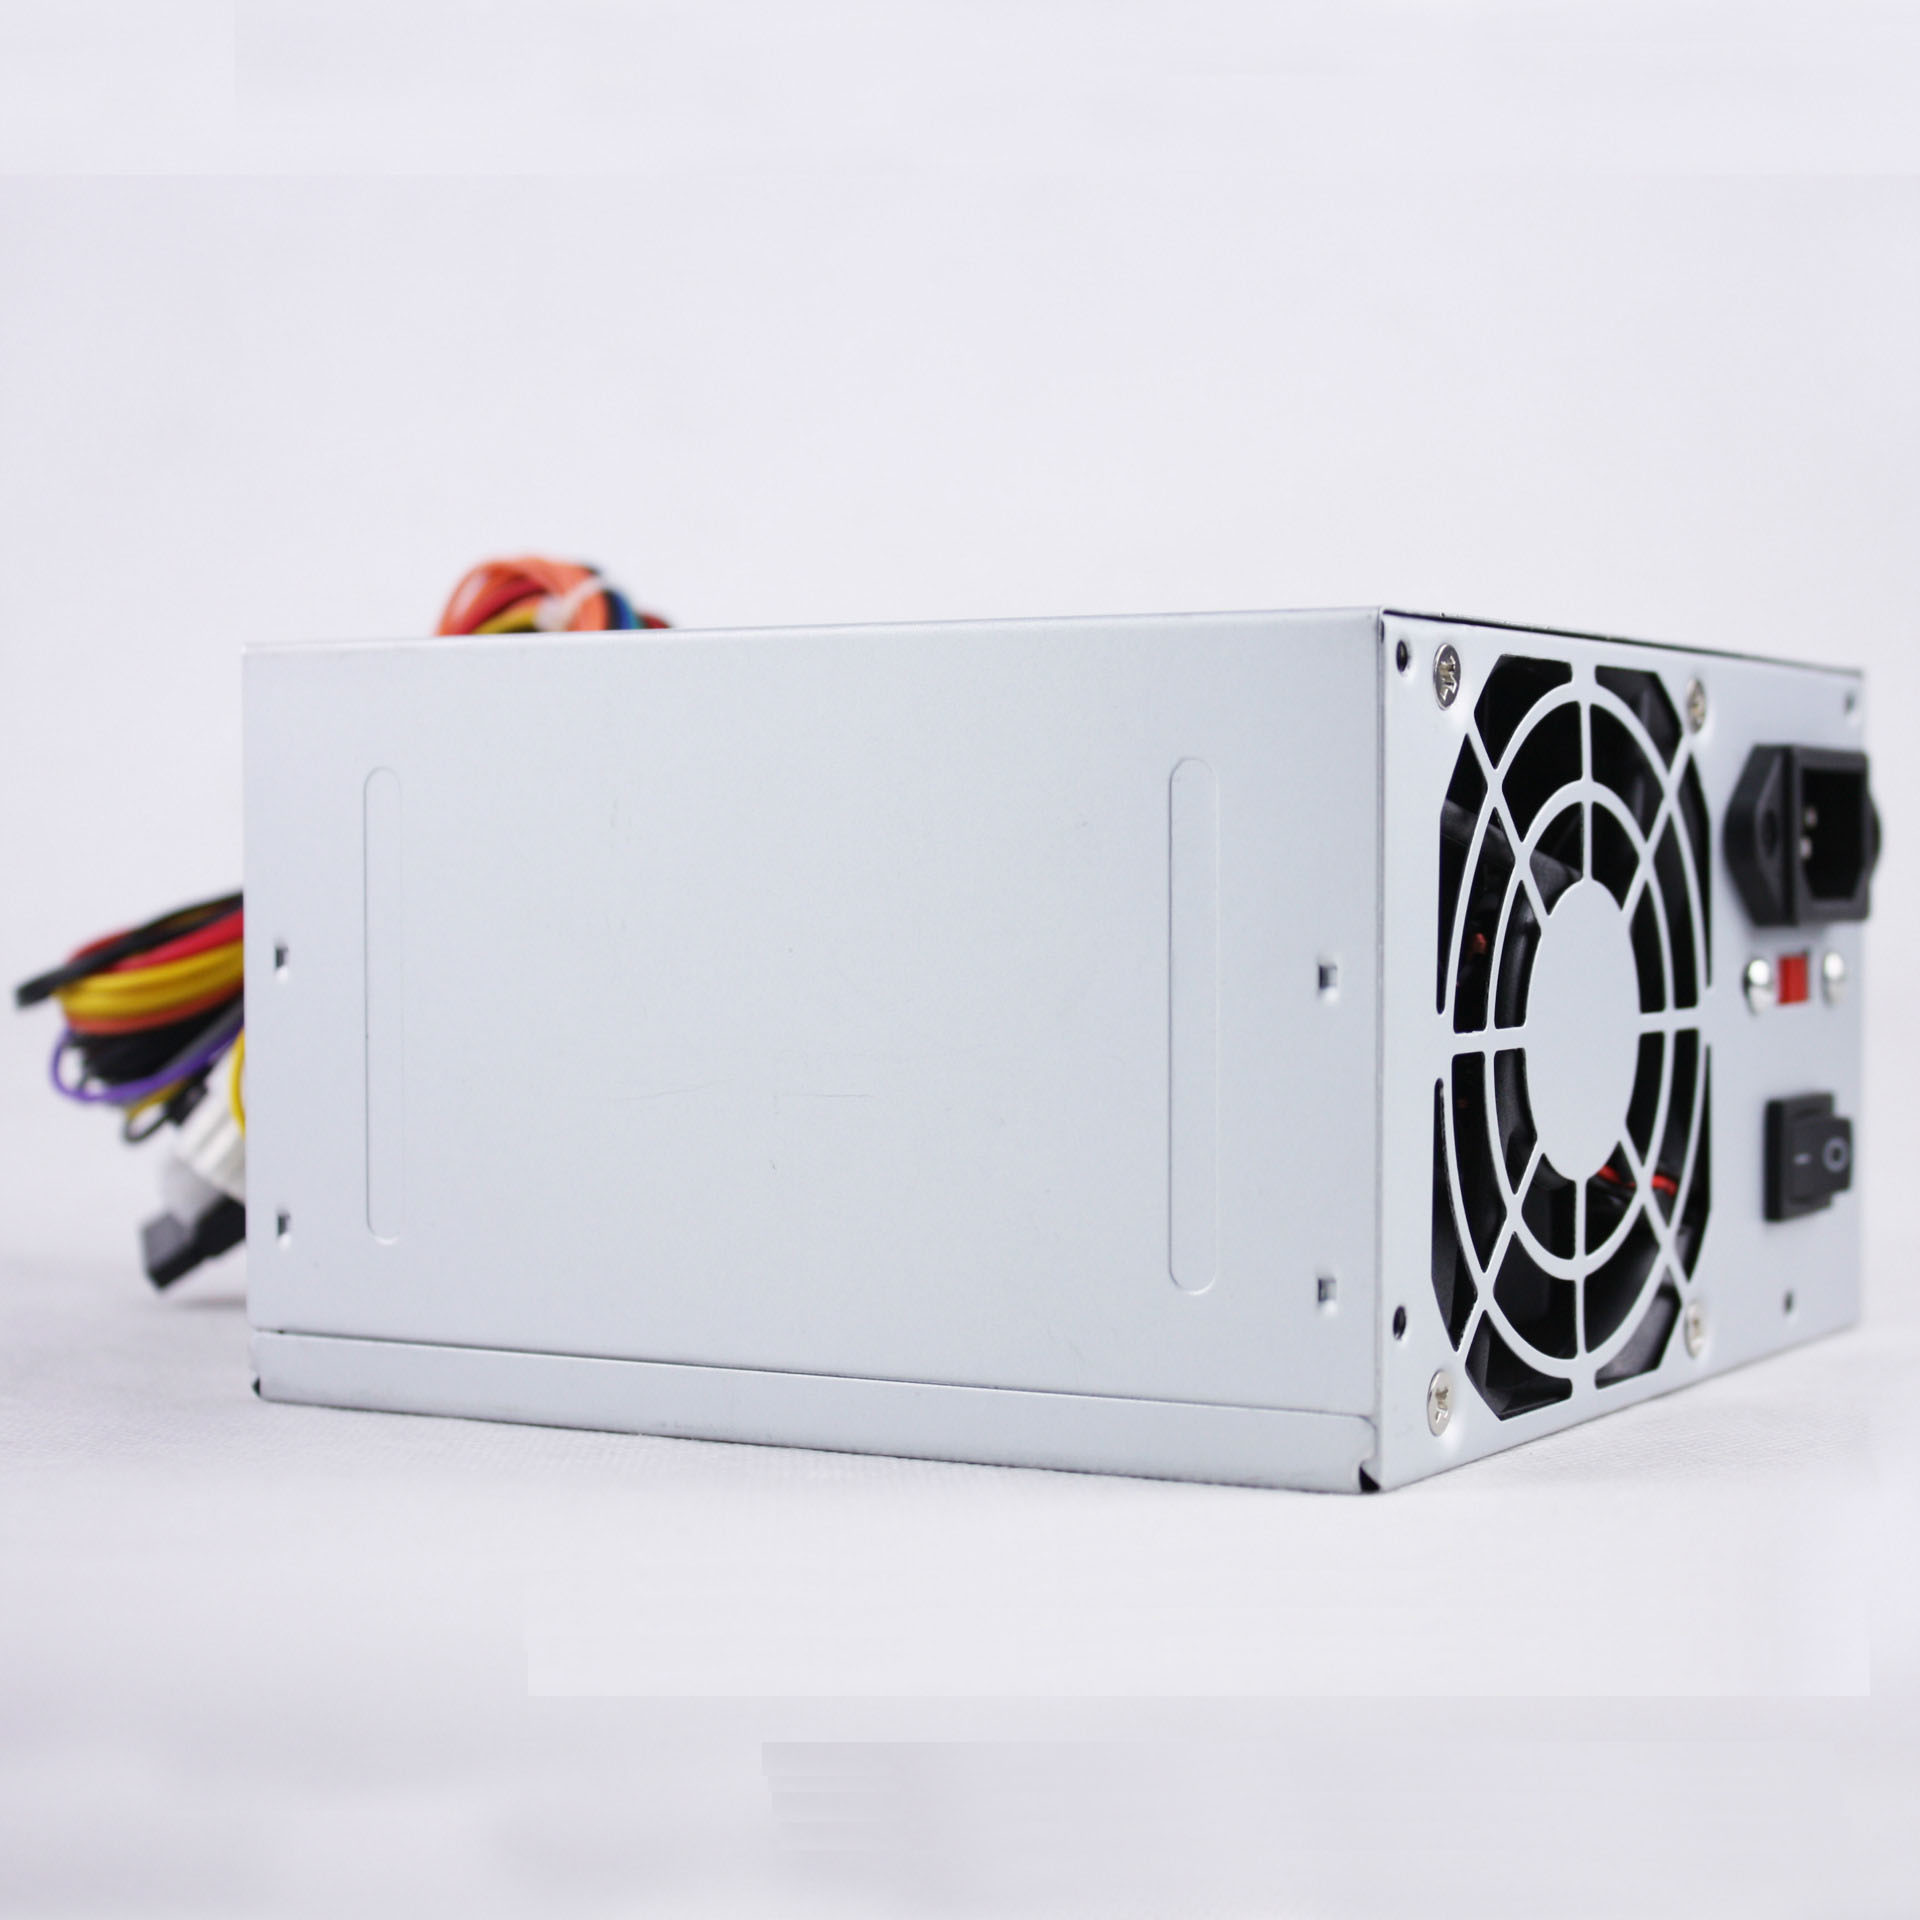 China Leading Manufacturer for Computer Power supply - Low price